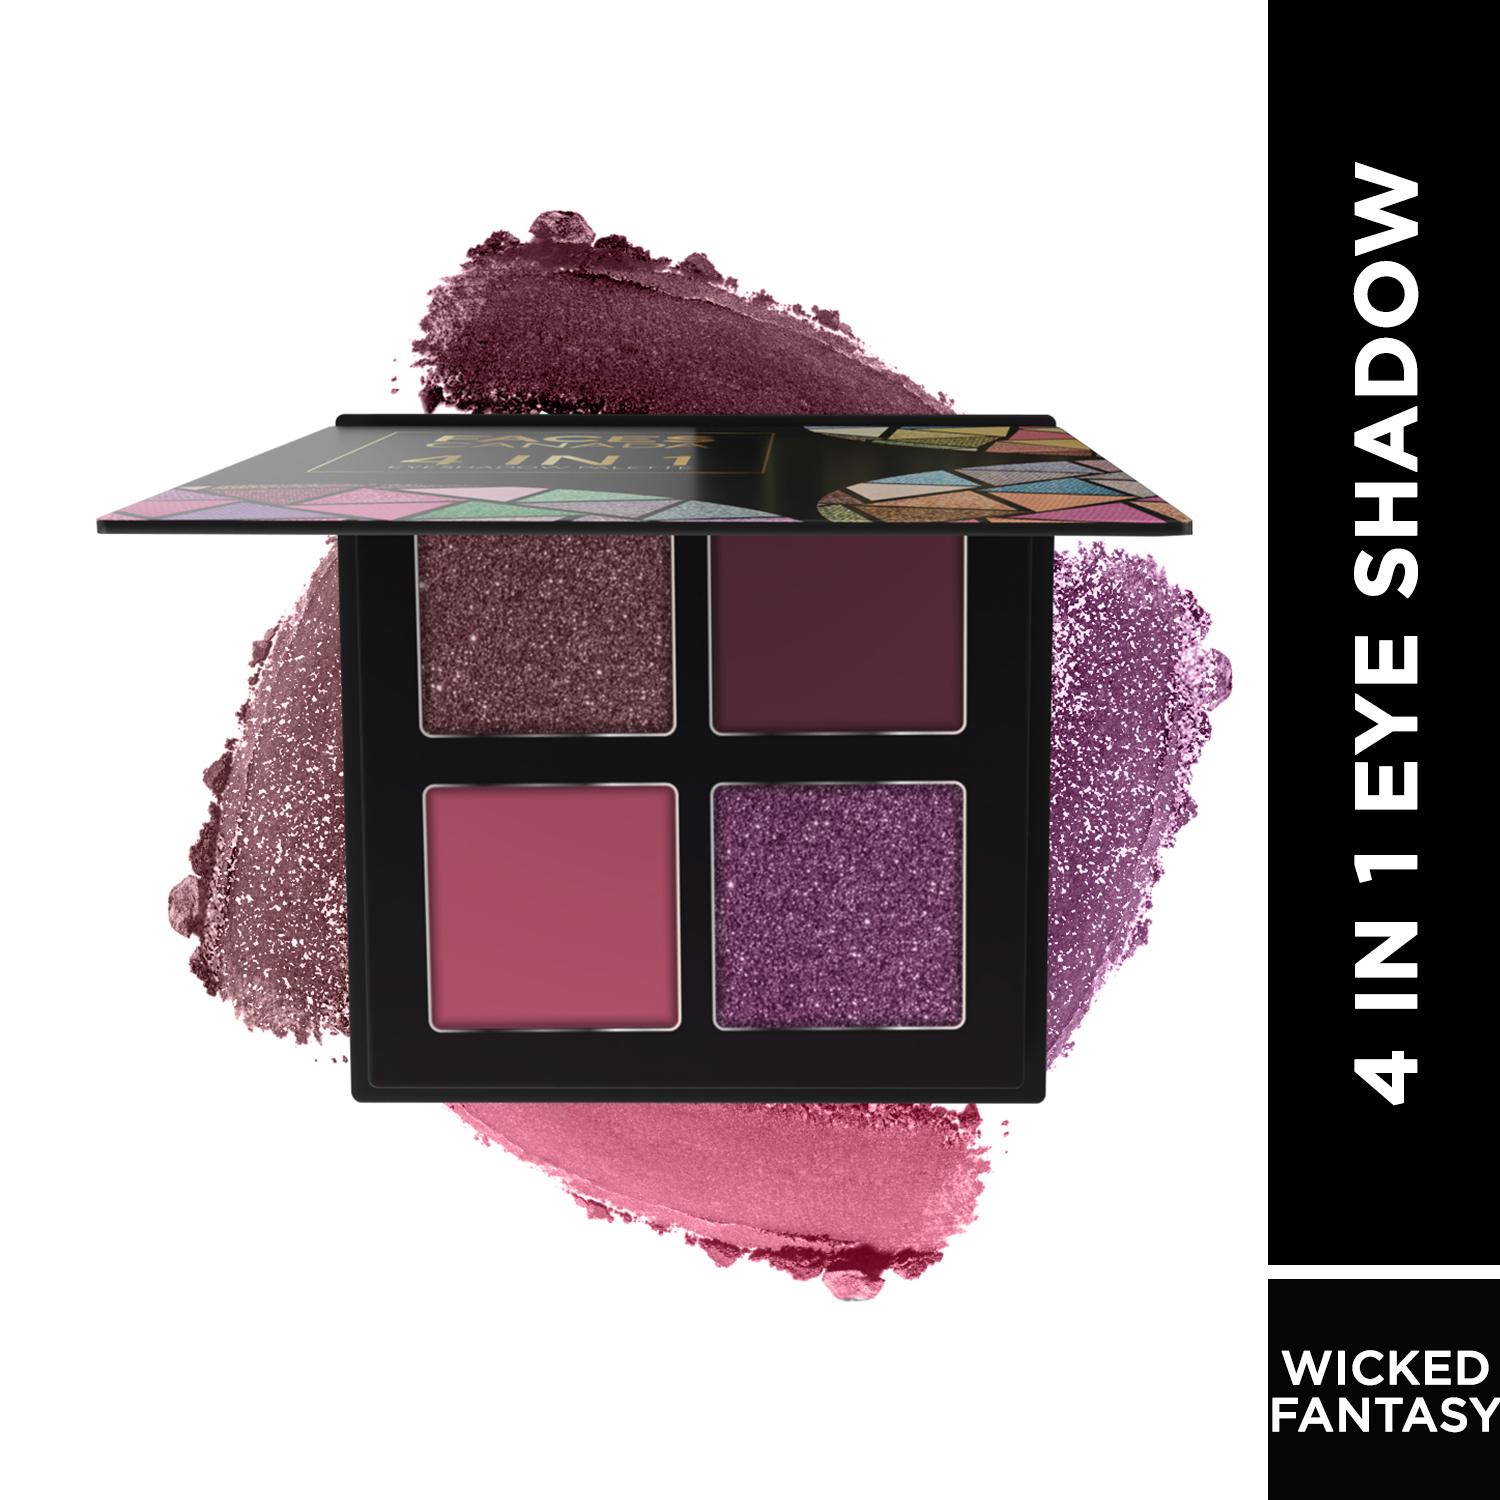 Faces Canada | Faces Canada 4 IN 1 Eyeshadow Palette - Wicked Fantasy 03, Shimmer & Matte (4.8 g)